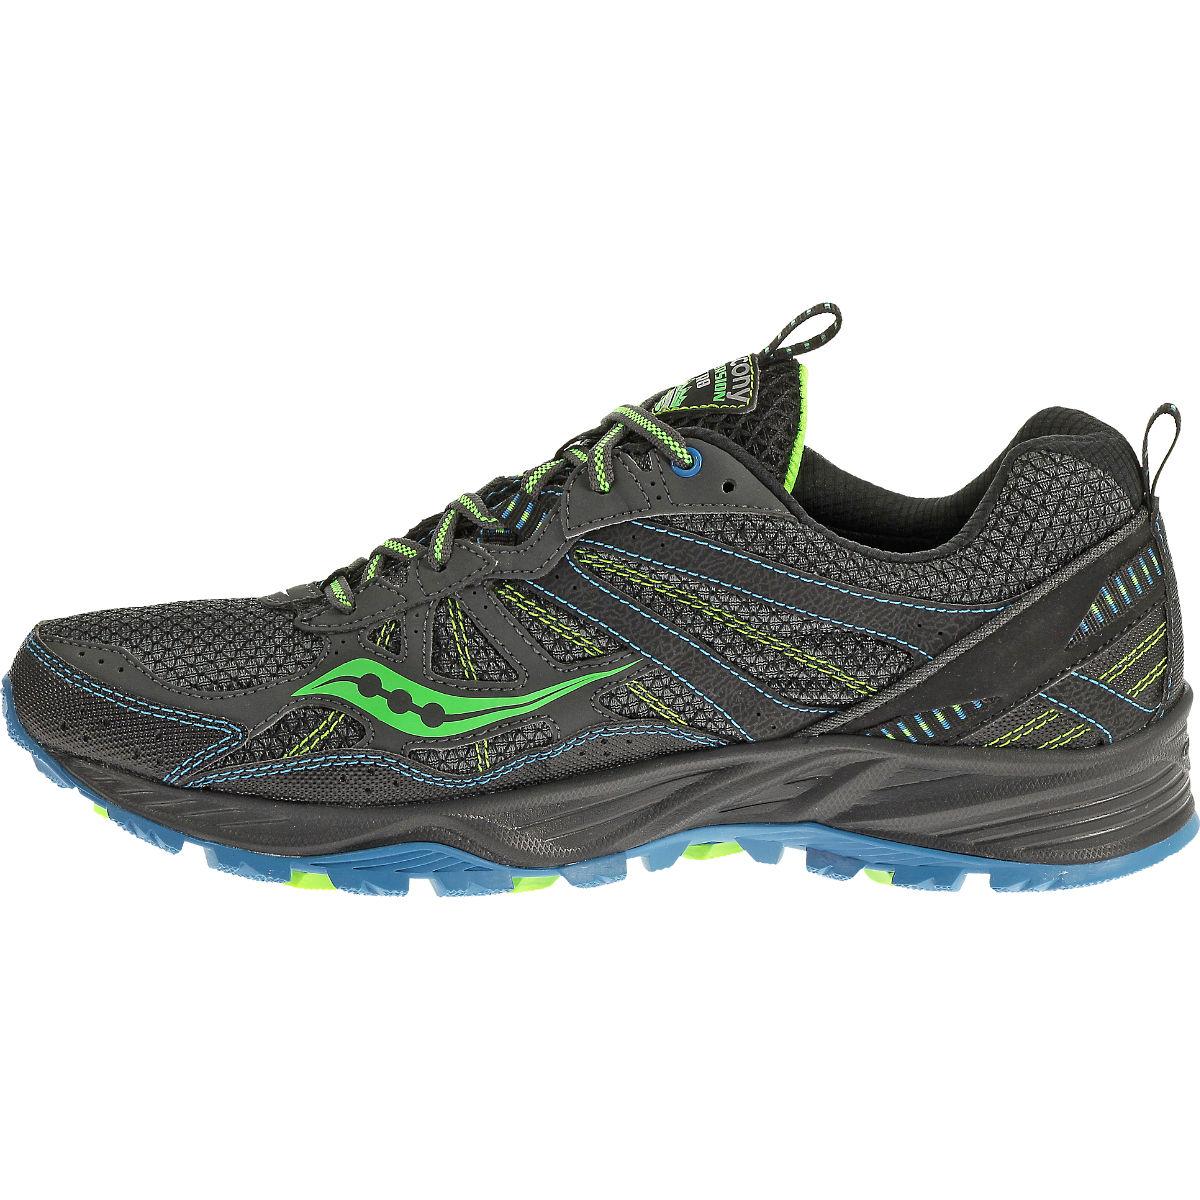 saucony men's excursion tr8 trail running shoes grey